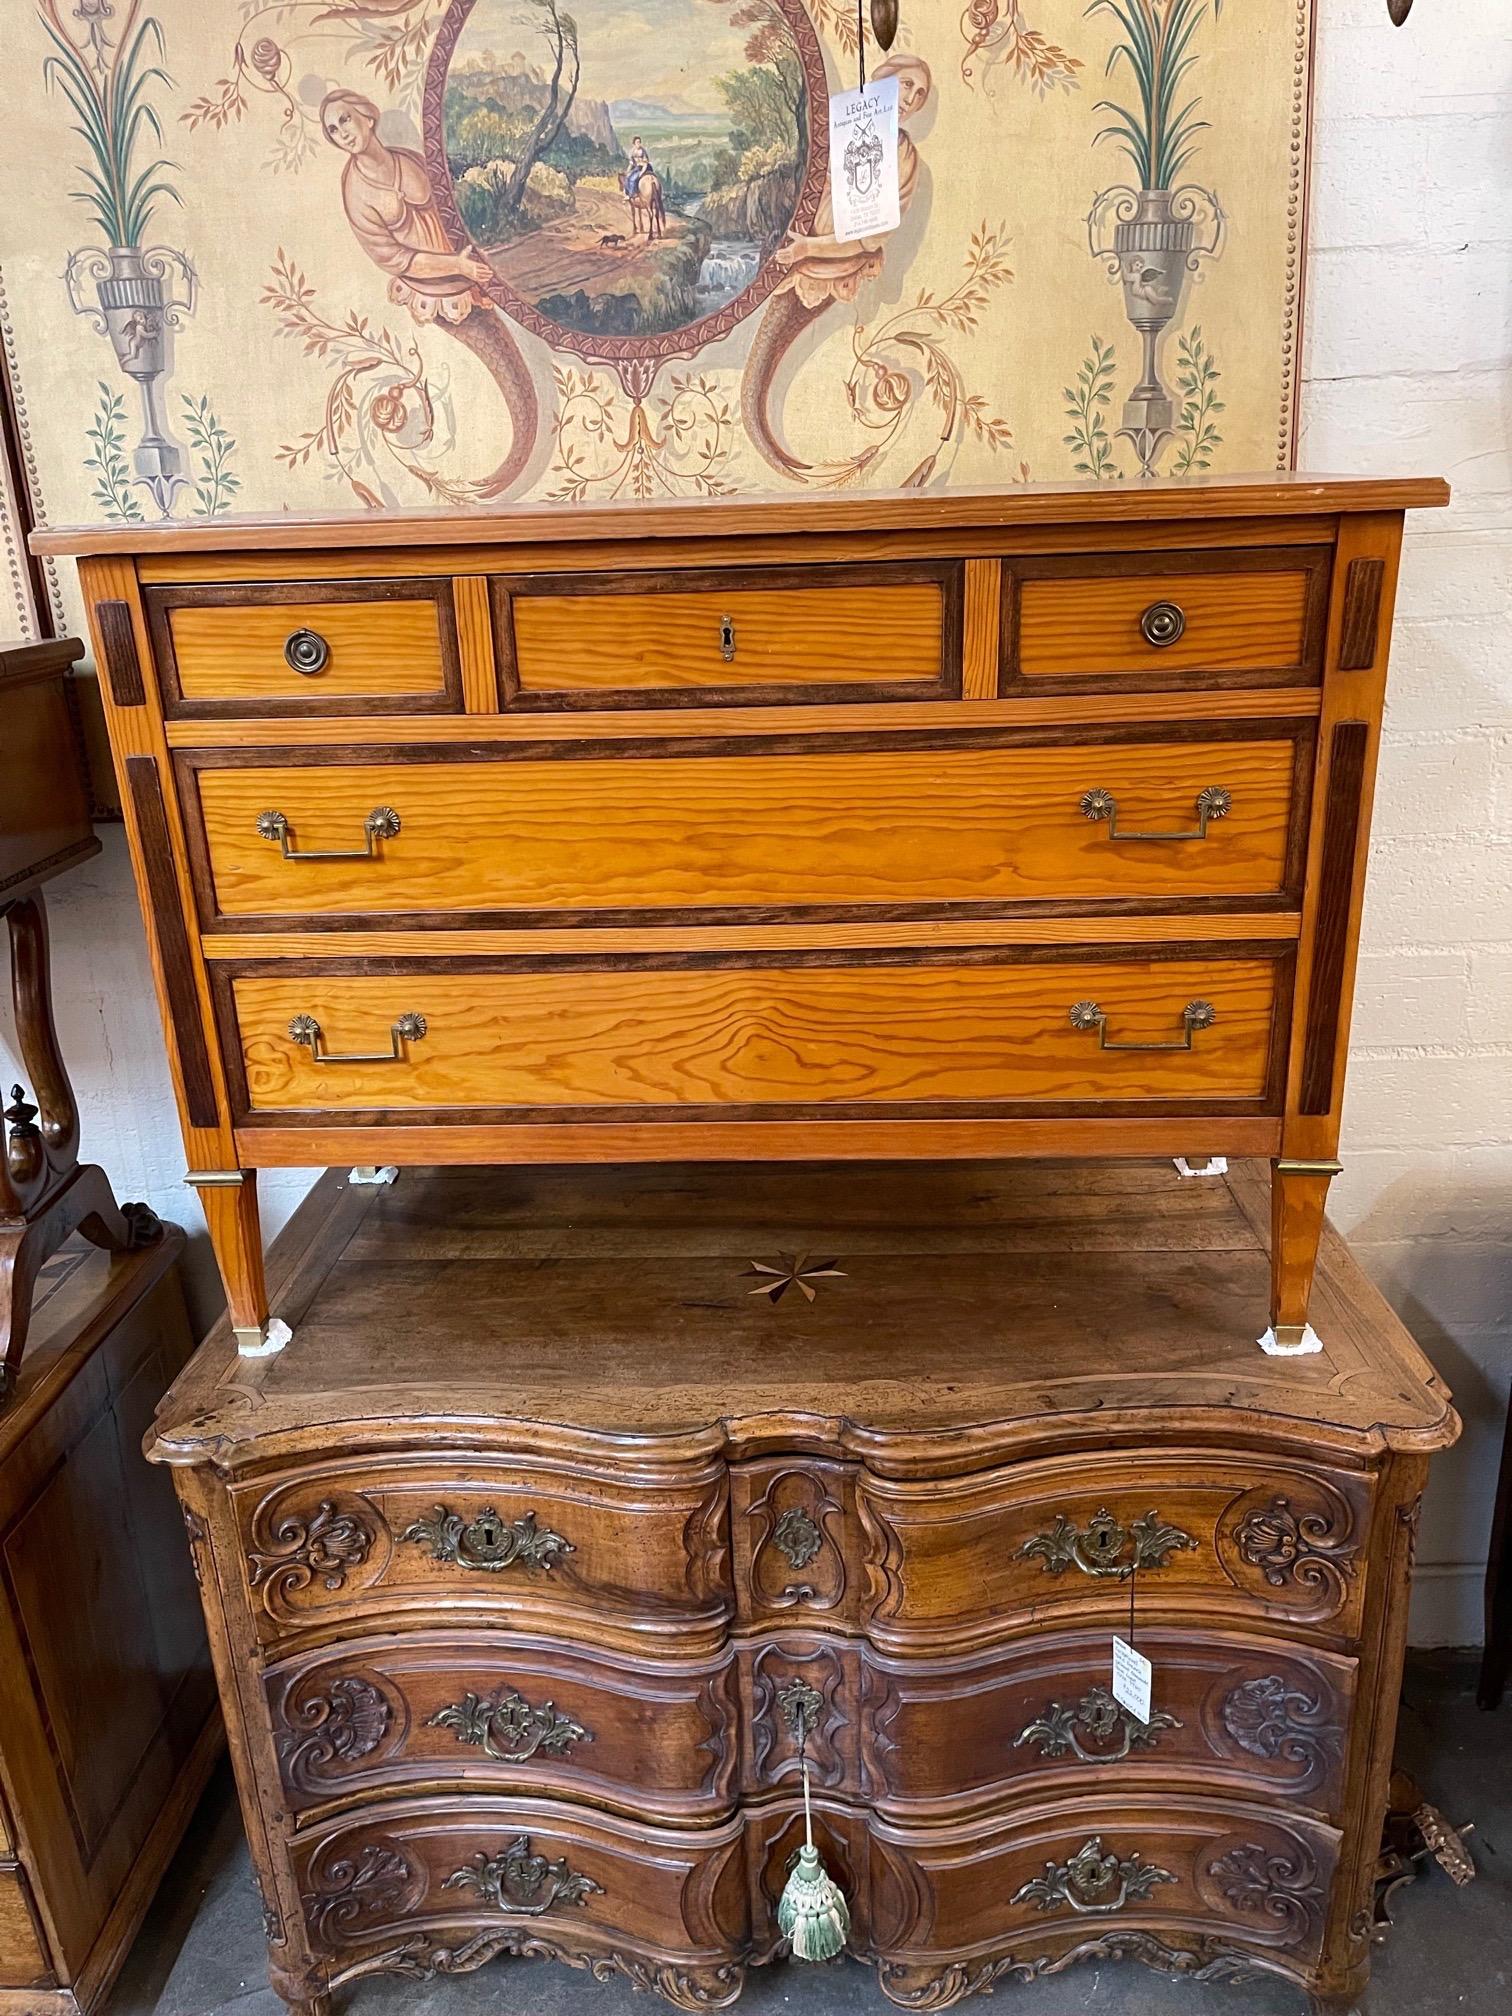 Lovely early 20th century French Louis XVI Maple commode. Nice wood grain, handsome hardware and 3 drawers for storage. Very nice!